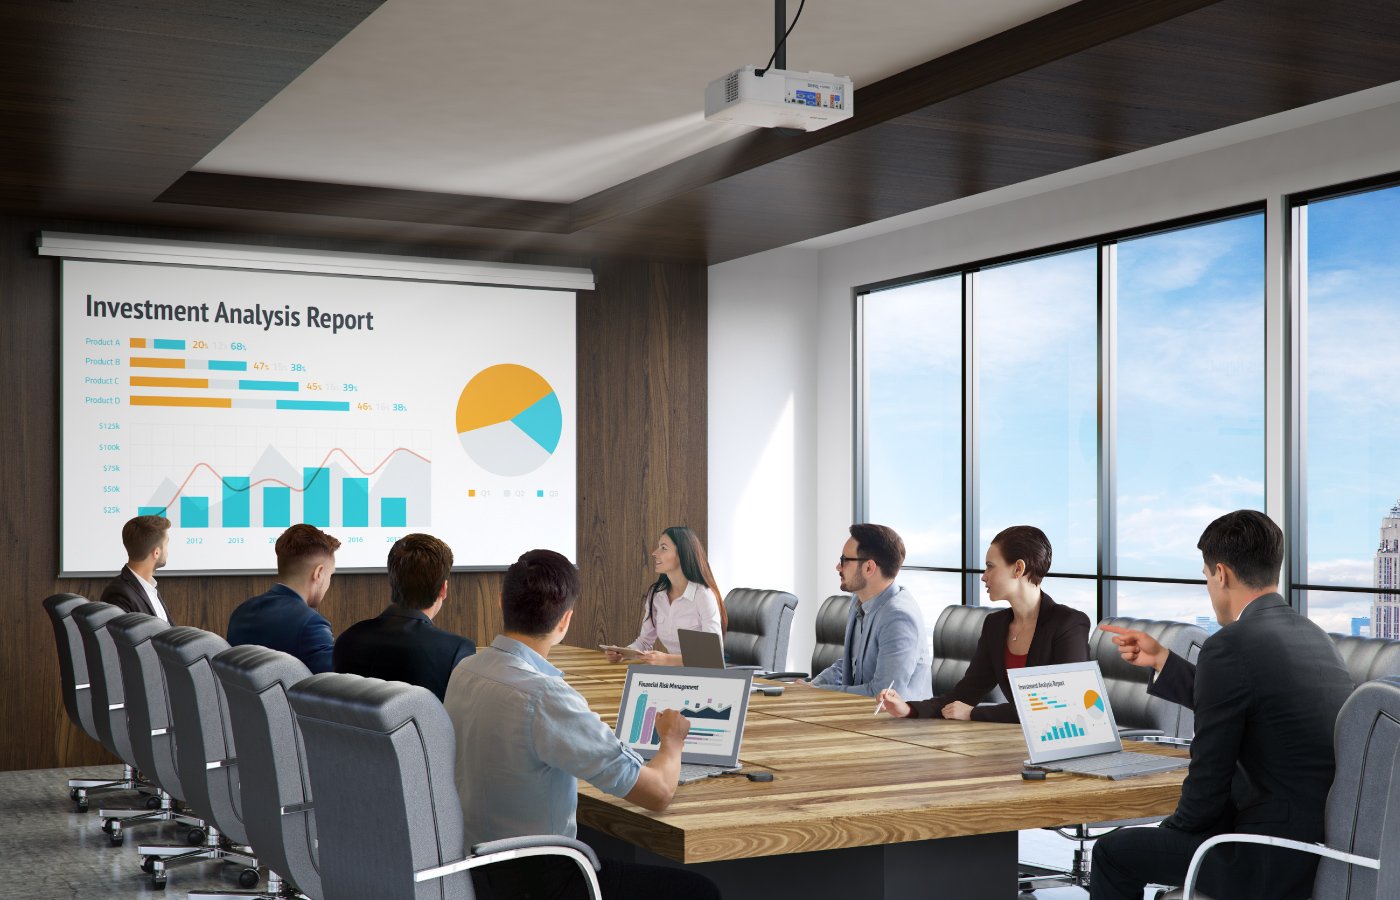 BenQ Superior Conference Room Projectors are reliable network-controlled projectors in large conference rooms or boardrooms with ambient light